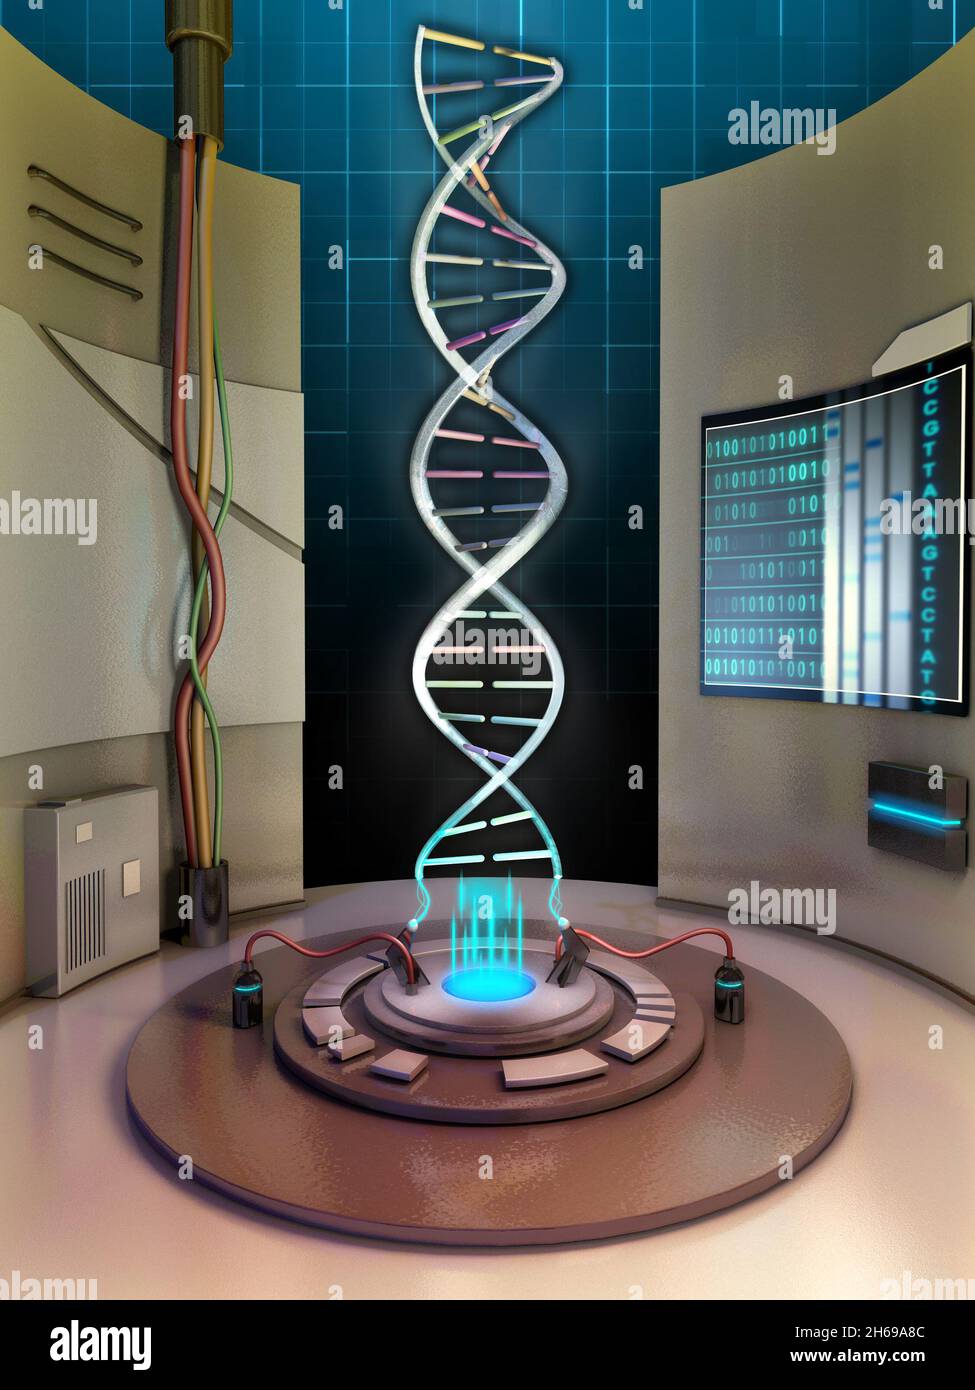 Creating a dna helix in an high technology chamber. Digital illustration. Stock Photo